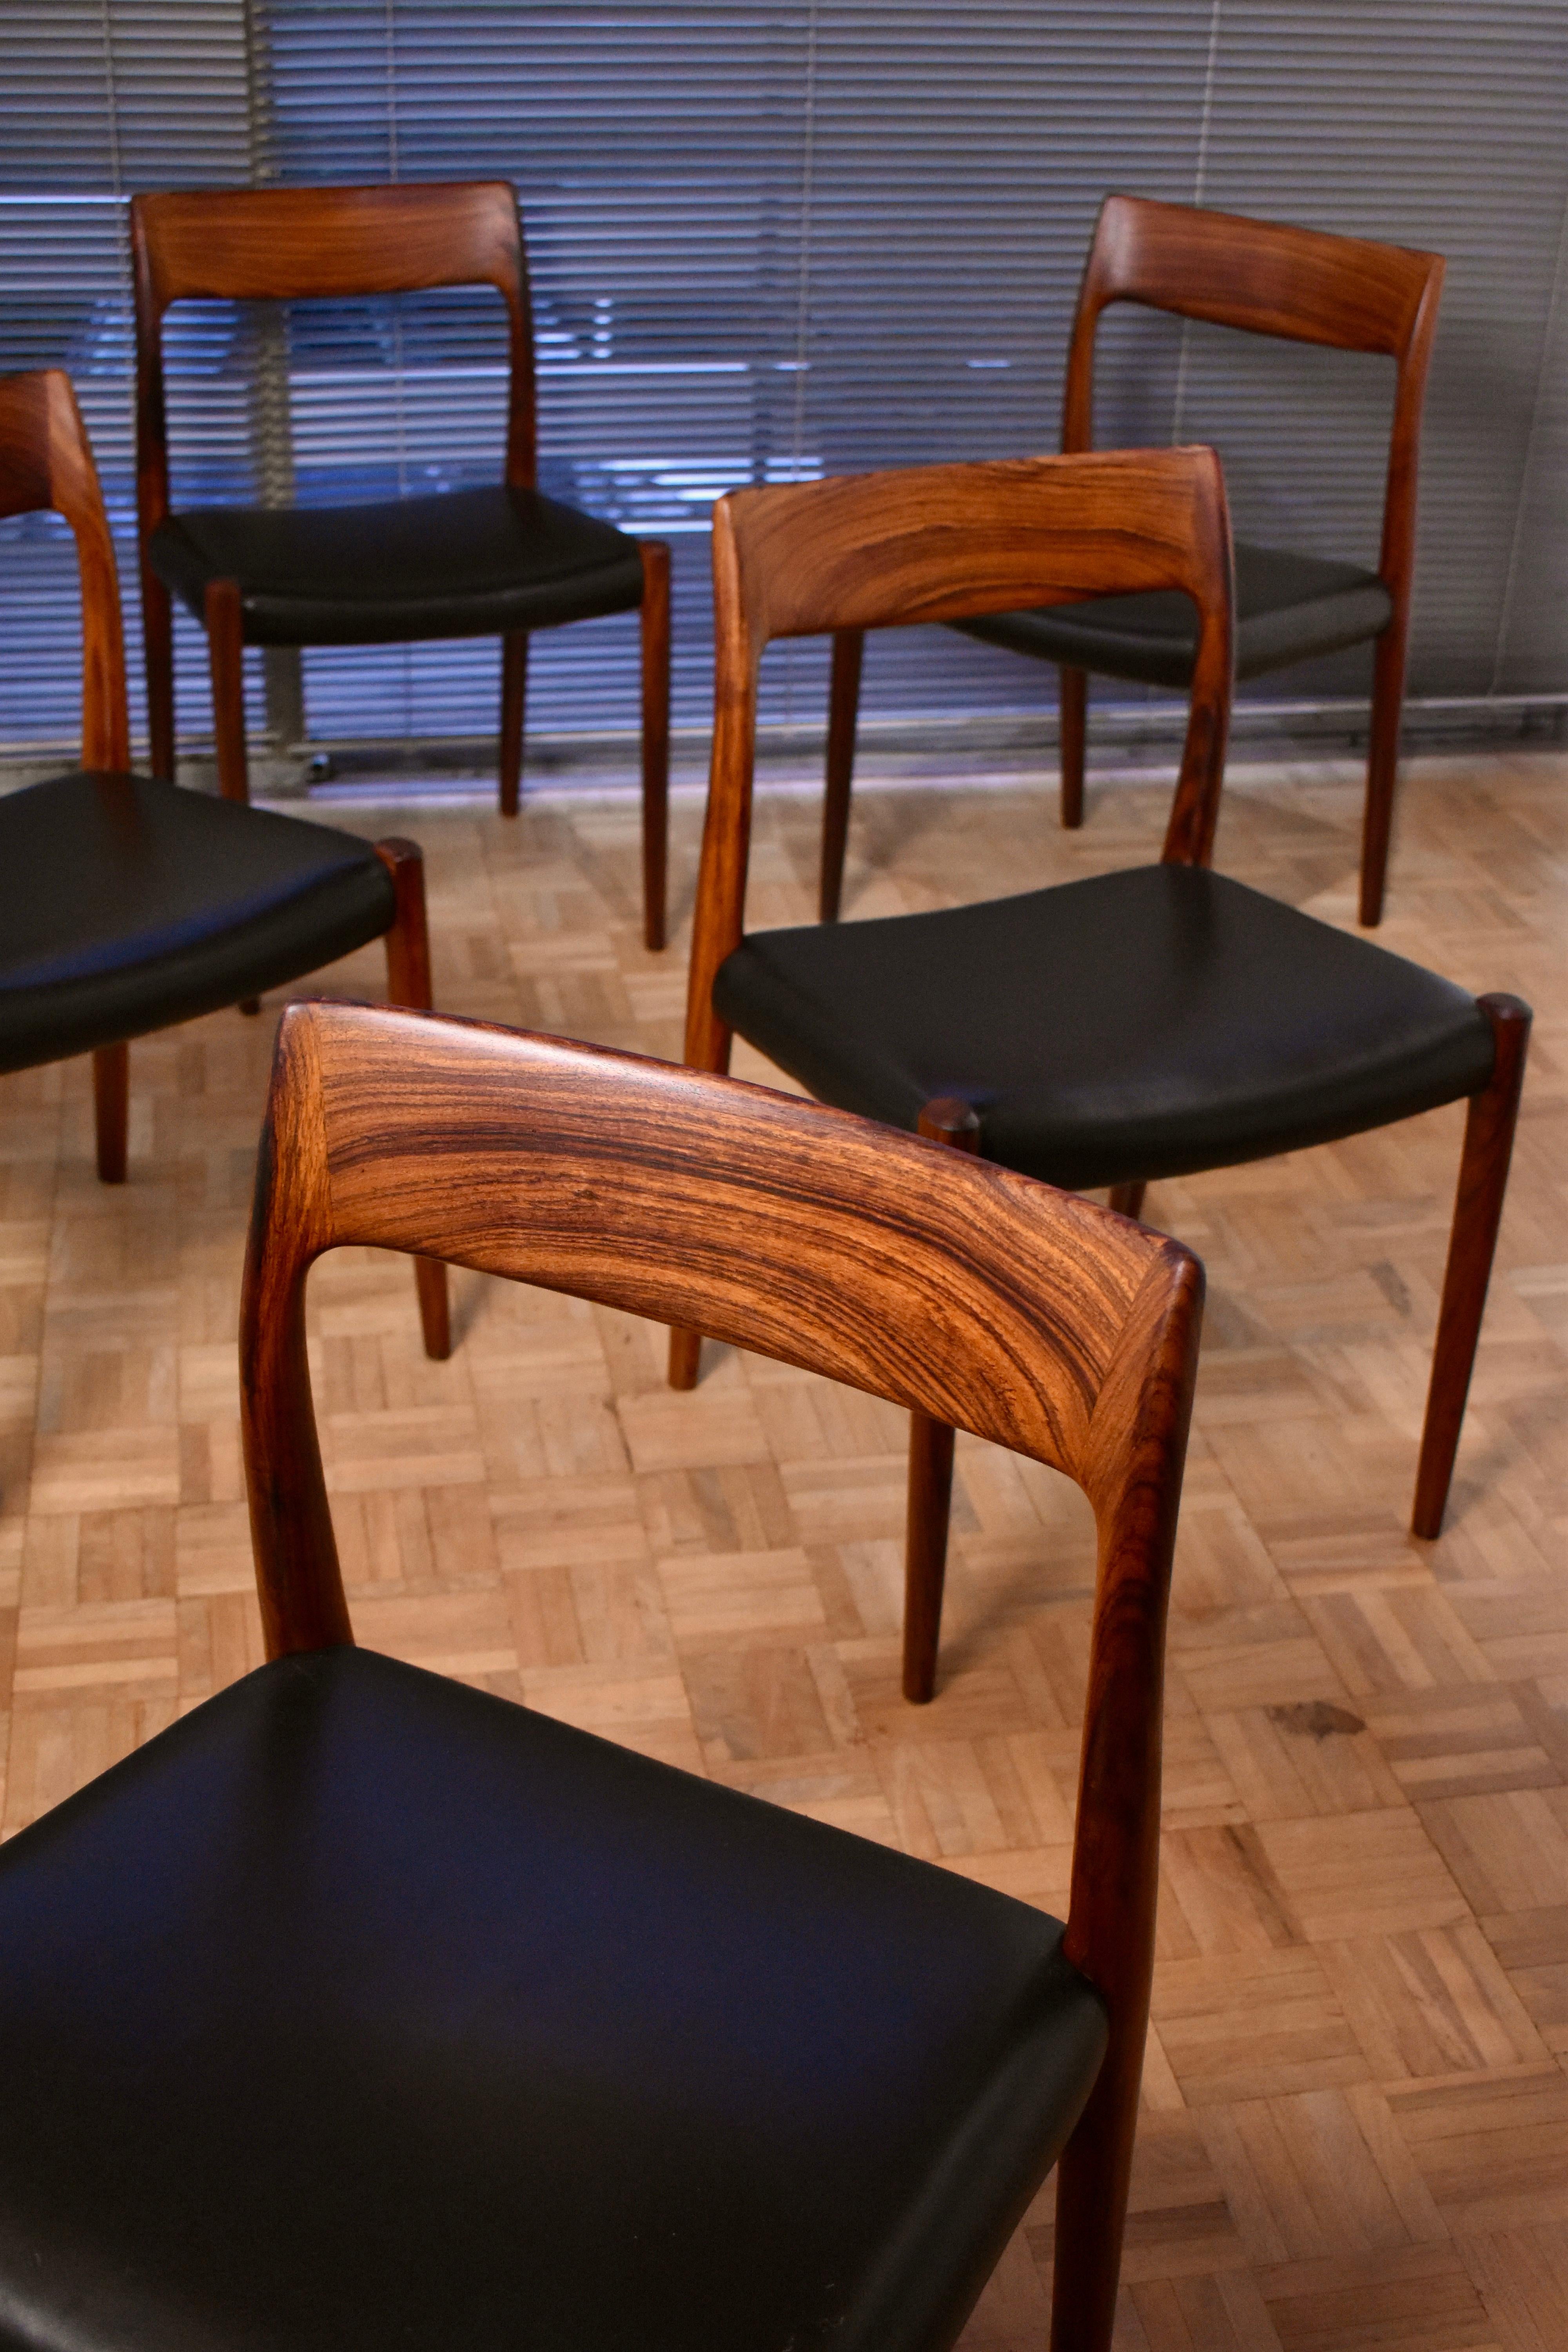 A particularly attractive set of six Niels Moller Model 77 solid rosewood chairs designed in 1959 for J.L Mollers Mobelfabrik.

This set exhibiting wonderful grain to the timber and lovely colour across the set. Each chair has been upholstered in